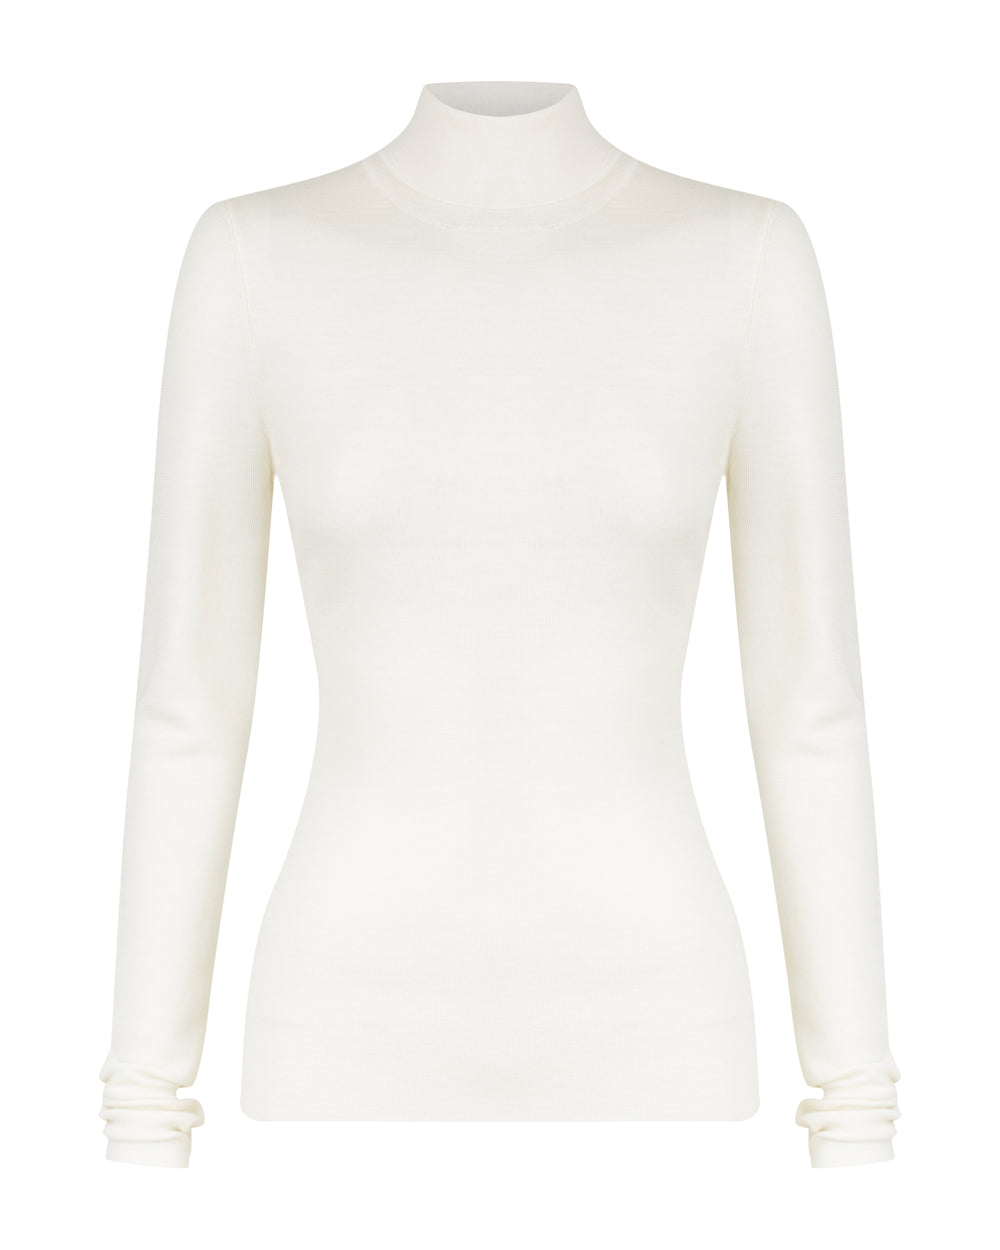 The Long Sleeve Knit Top